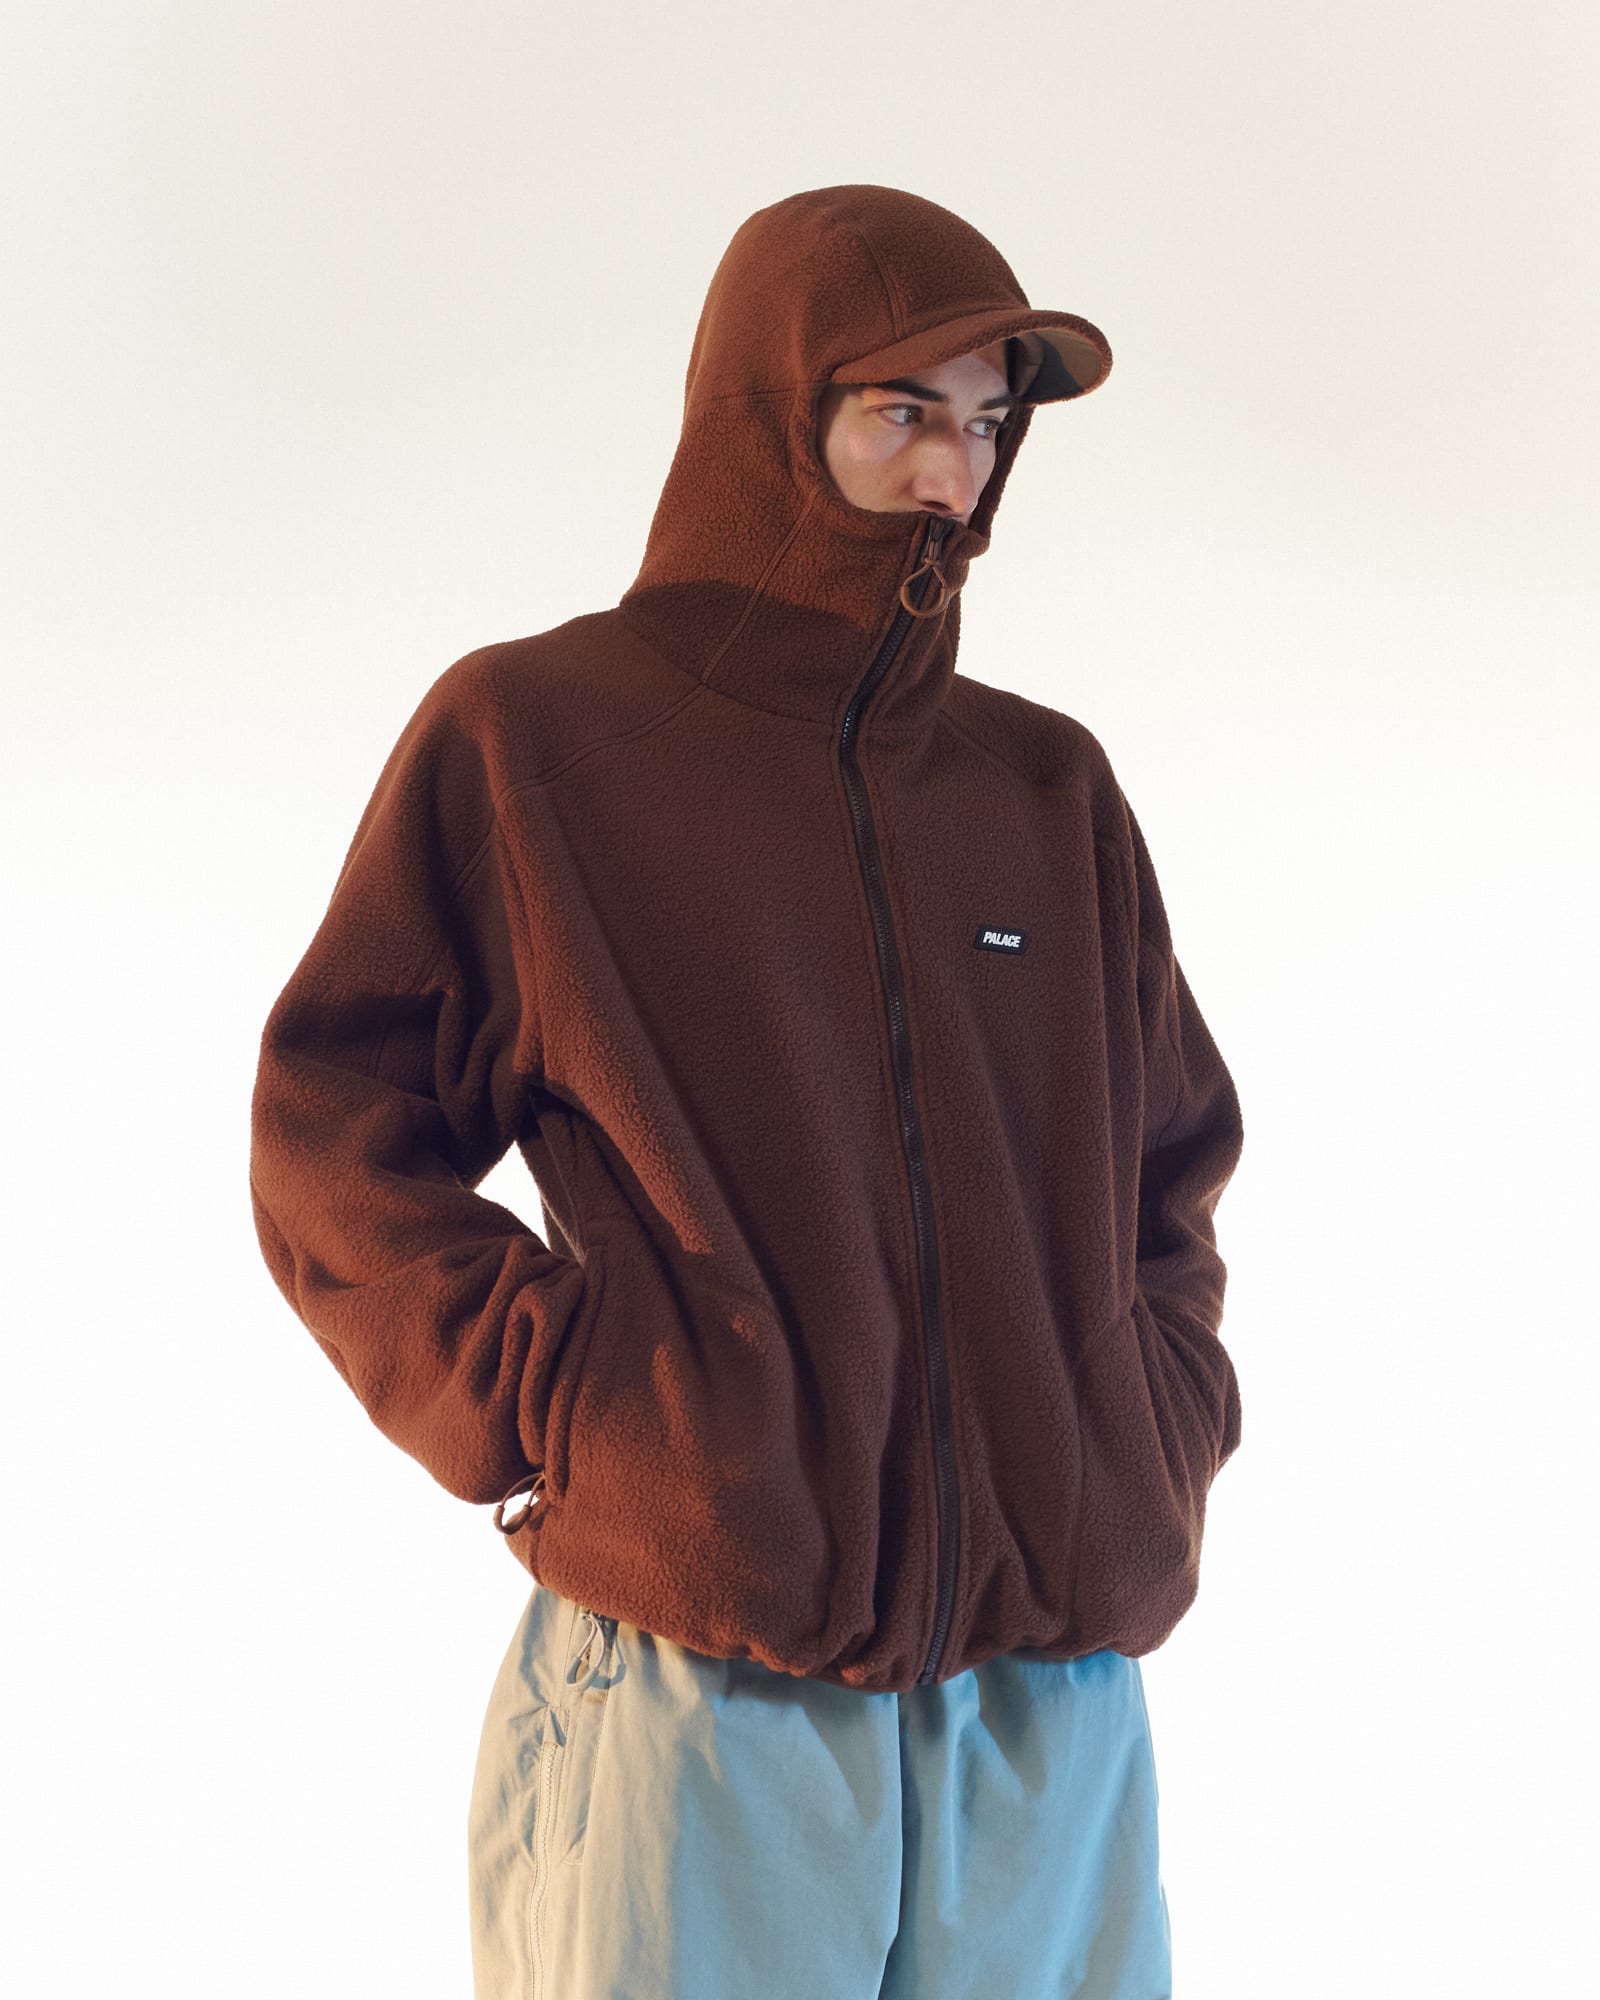 Palace lookbook model is shown